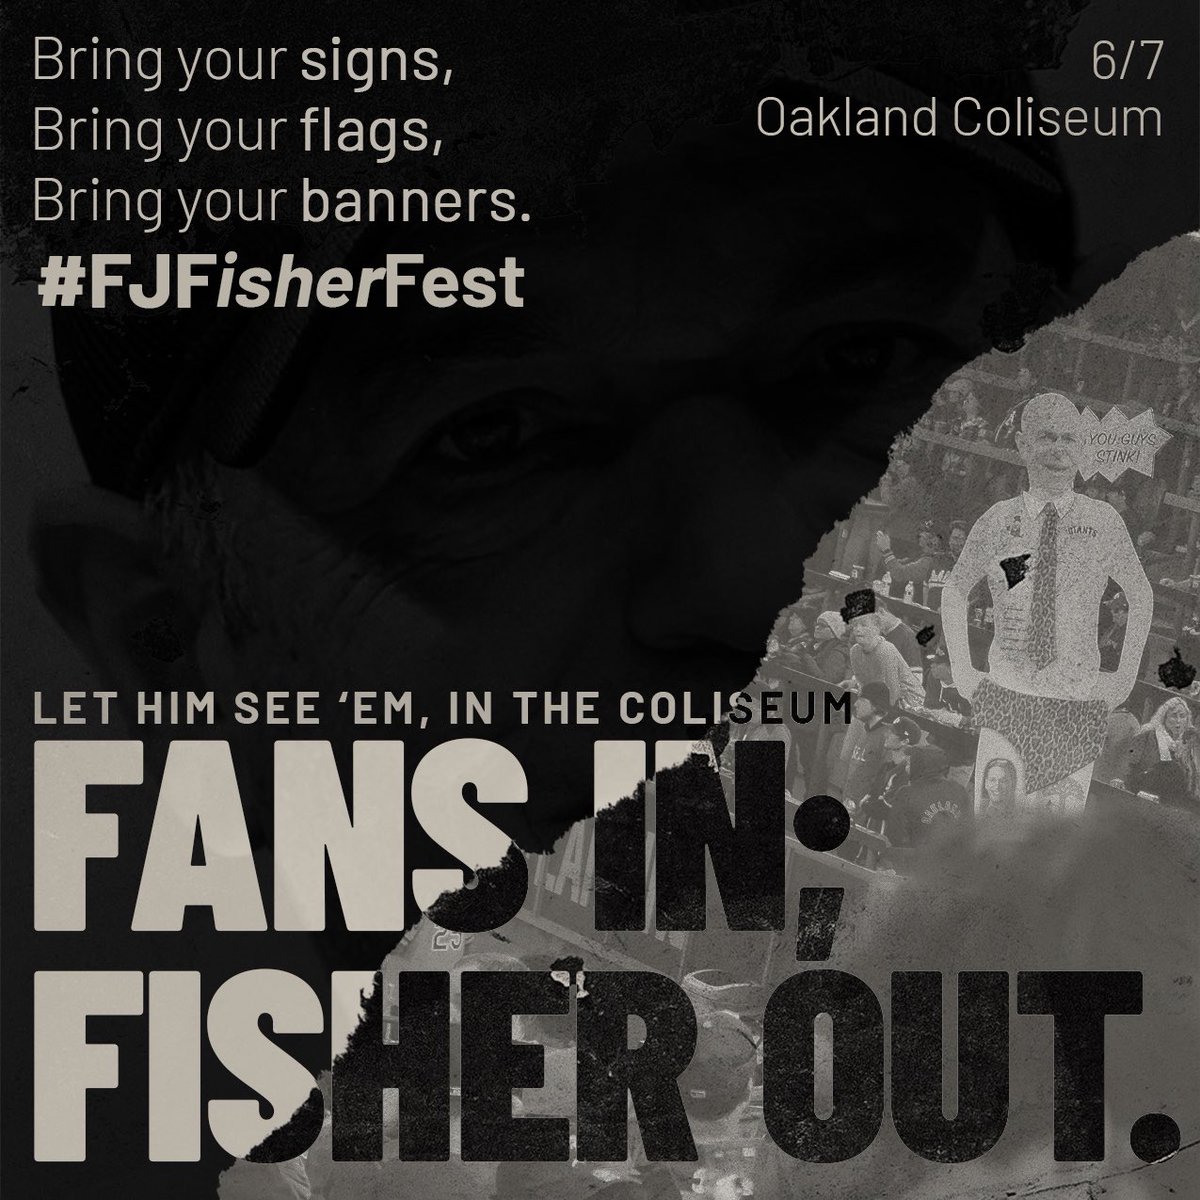 Everyone’s been asking when’s the next reverse boycott at the Coli… The date’s been set!!! 6/7 #FJFisherFest is upon us!!! Bring you signs, bring your flags, bring your banners, and let him see em’ in the Coliseum!!! Fans in; FISHER OUT!!!!